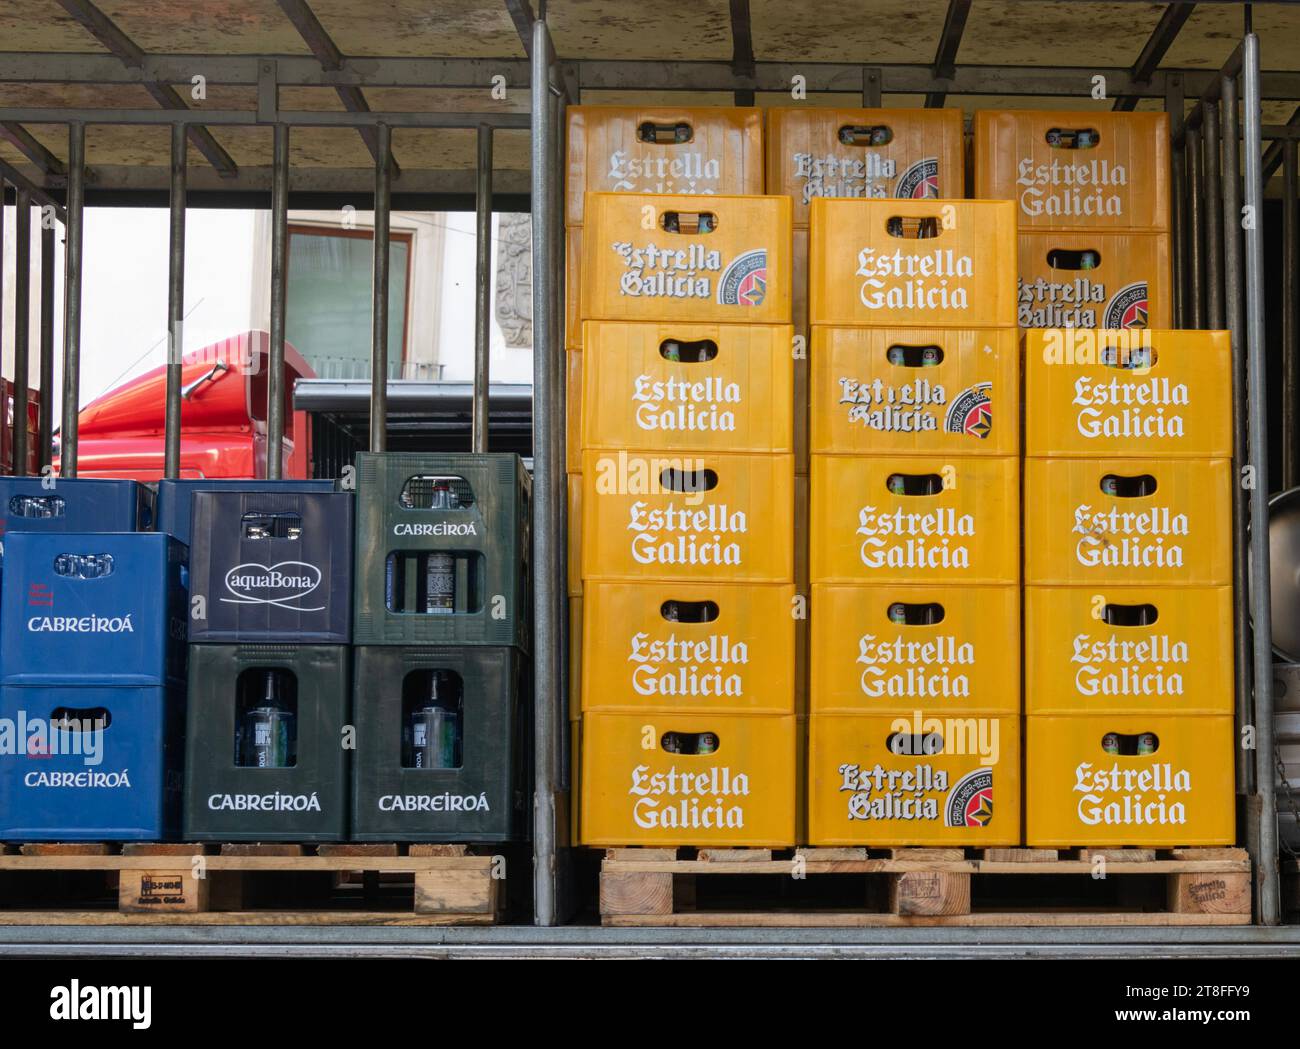 Crates of Estrella Galicia lager beer loaded on a lorry in Vigo Spain Stock Photo